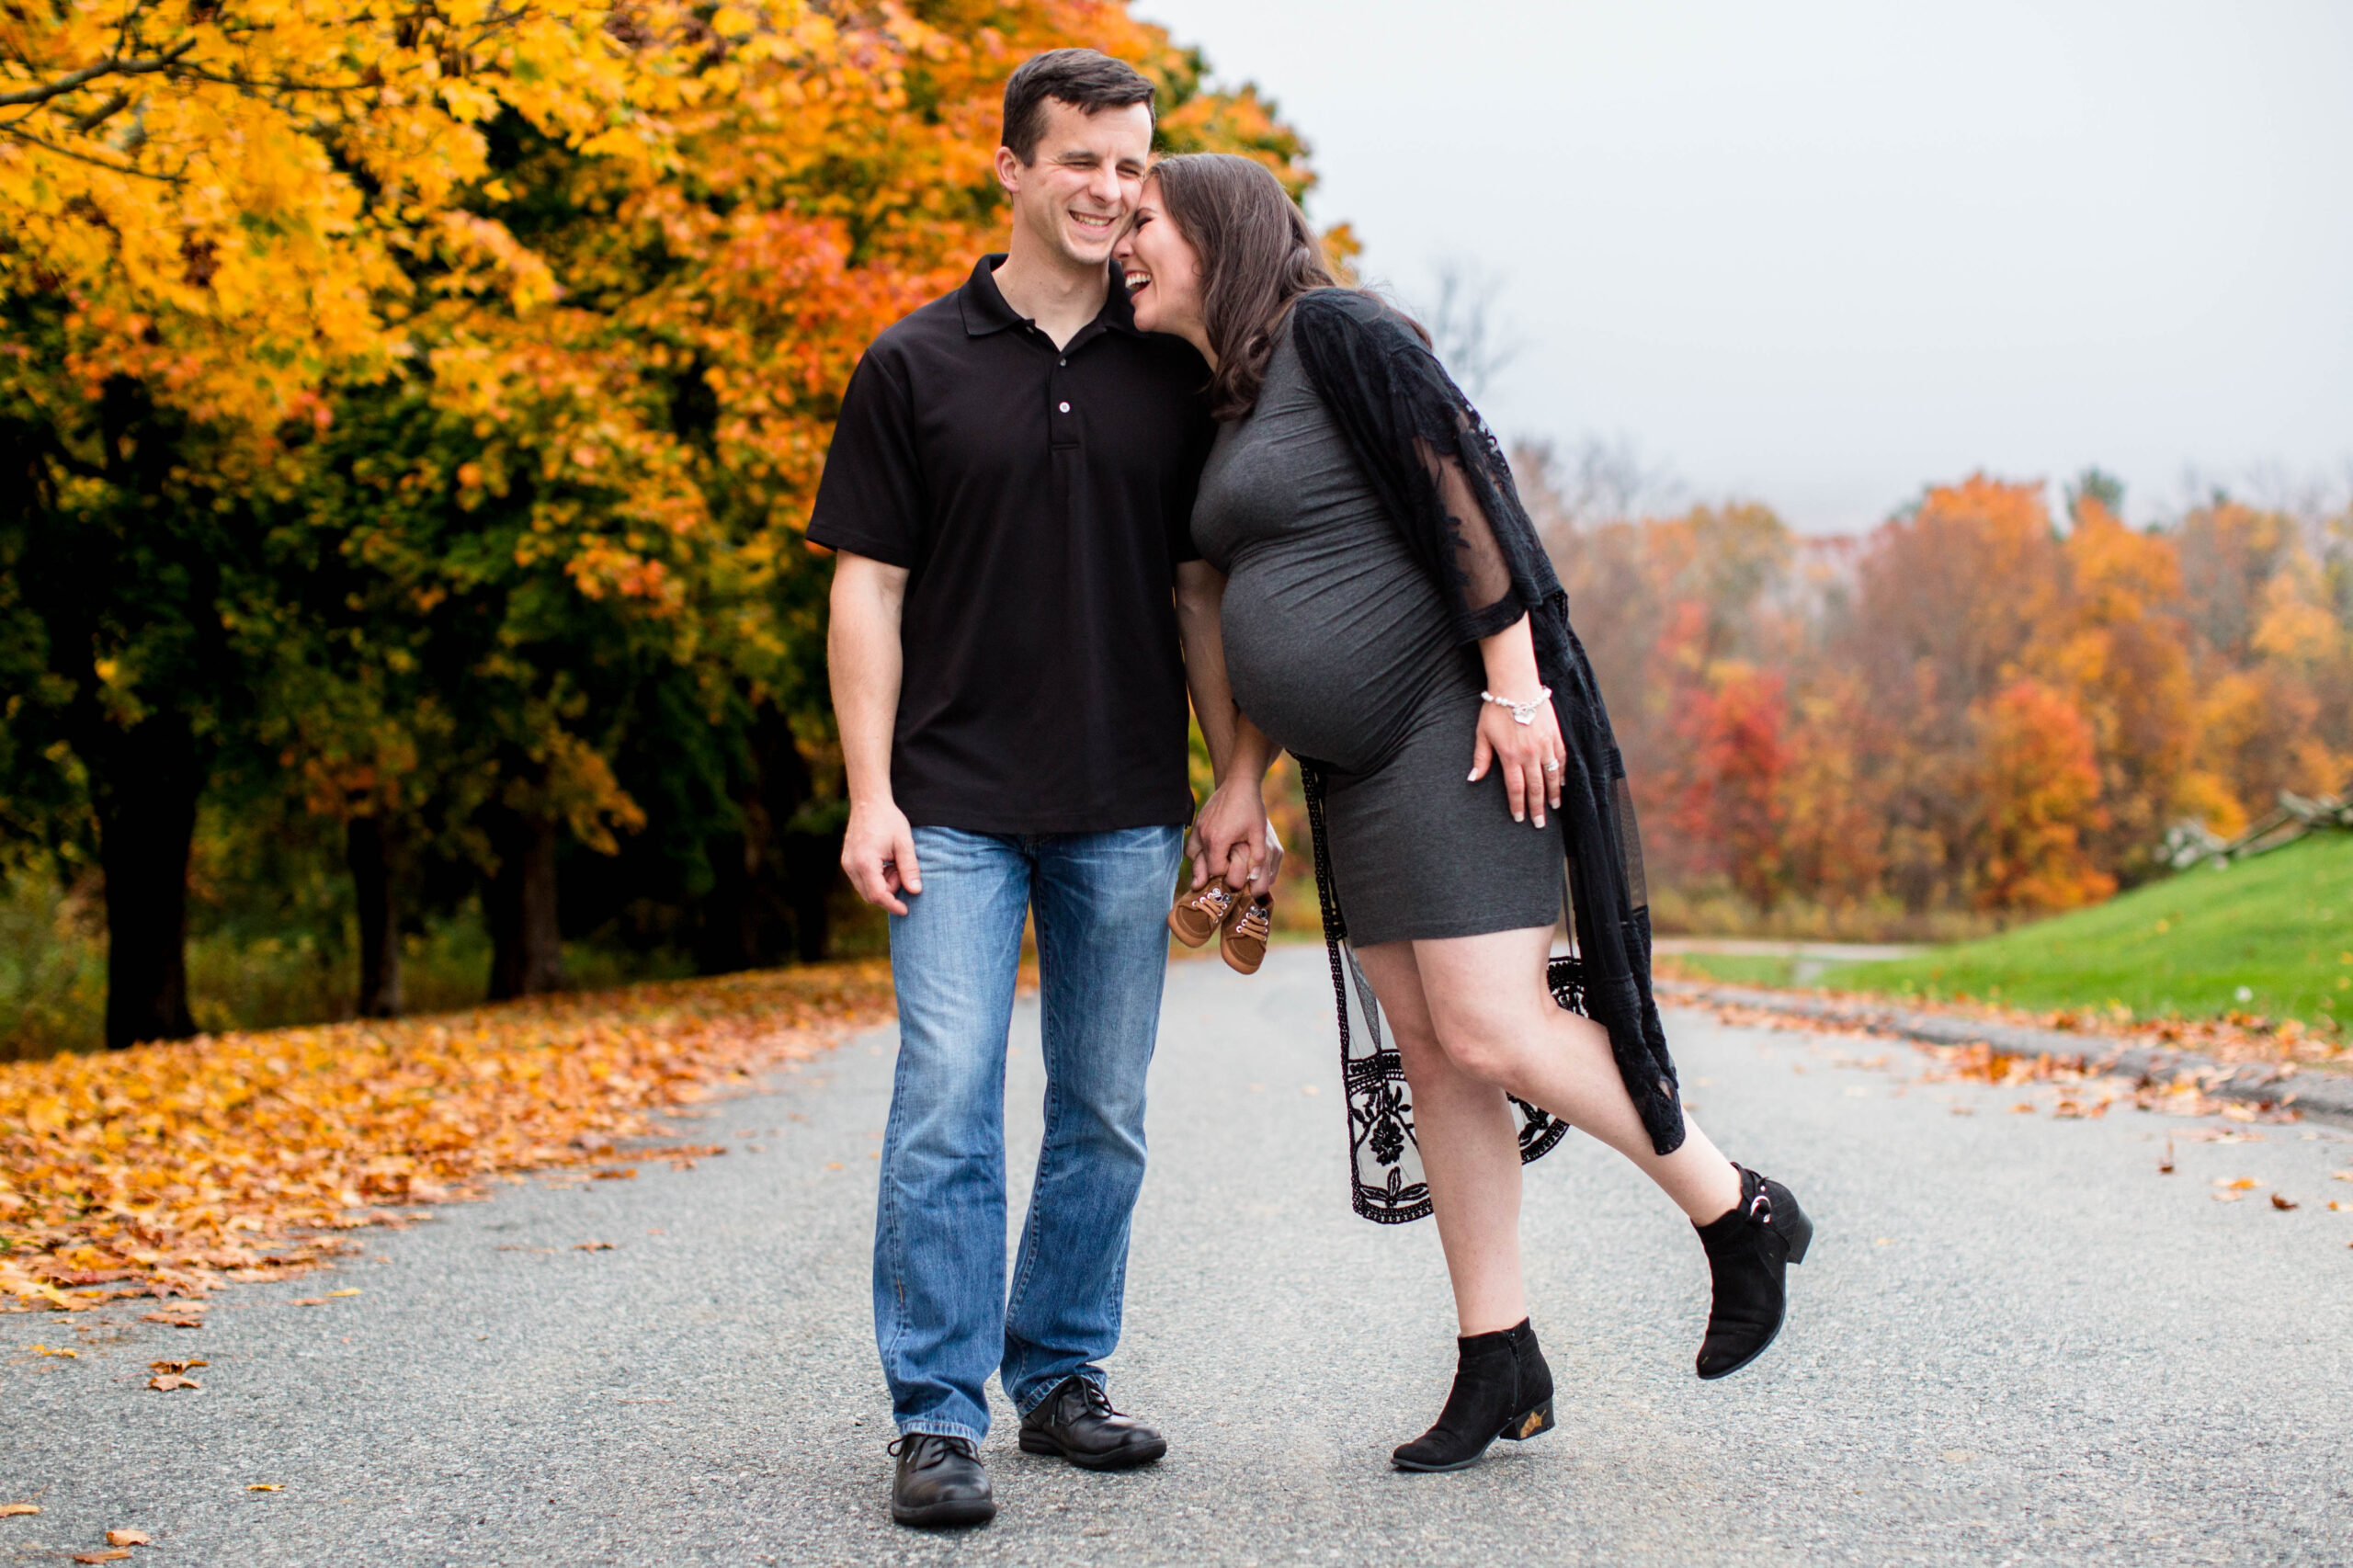 Pregnant women laughing and snuggling into her husband in beautiful fall weather